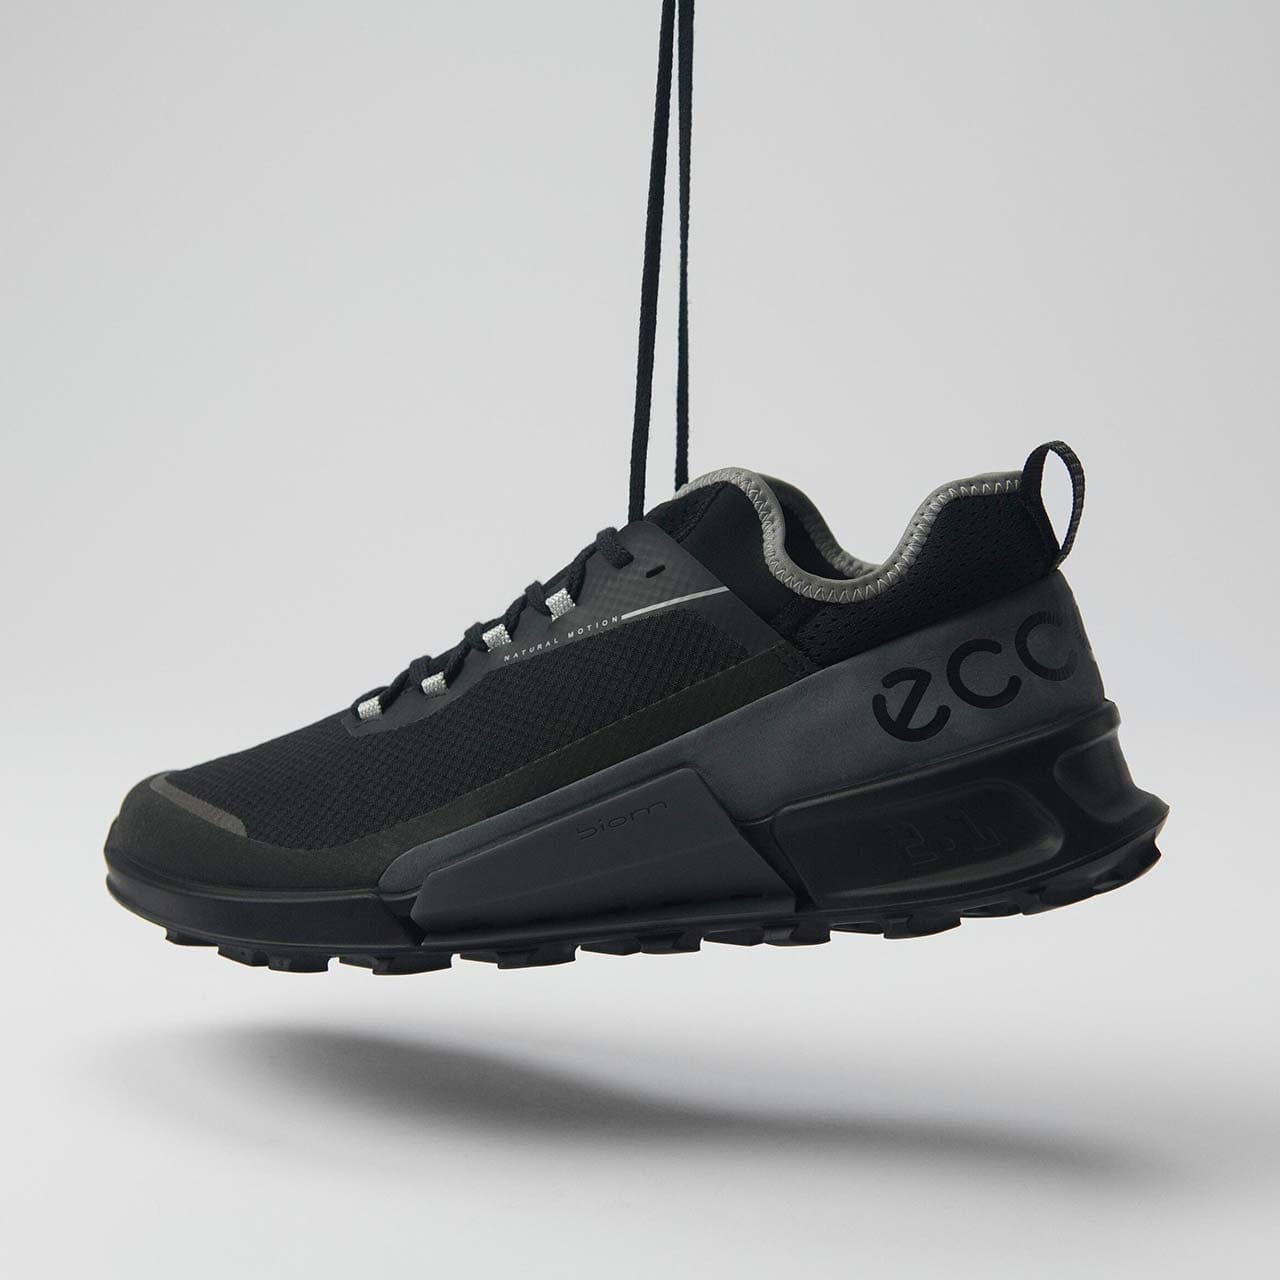 Black sneaker hanging by laces